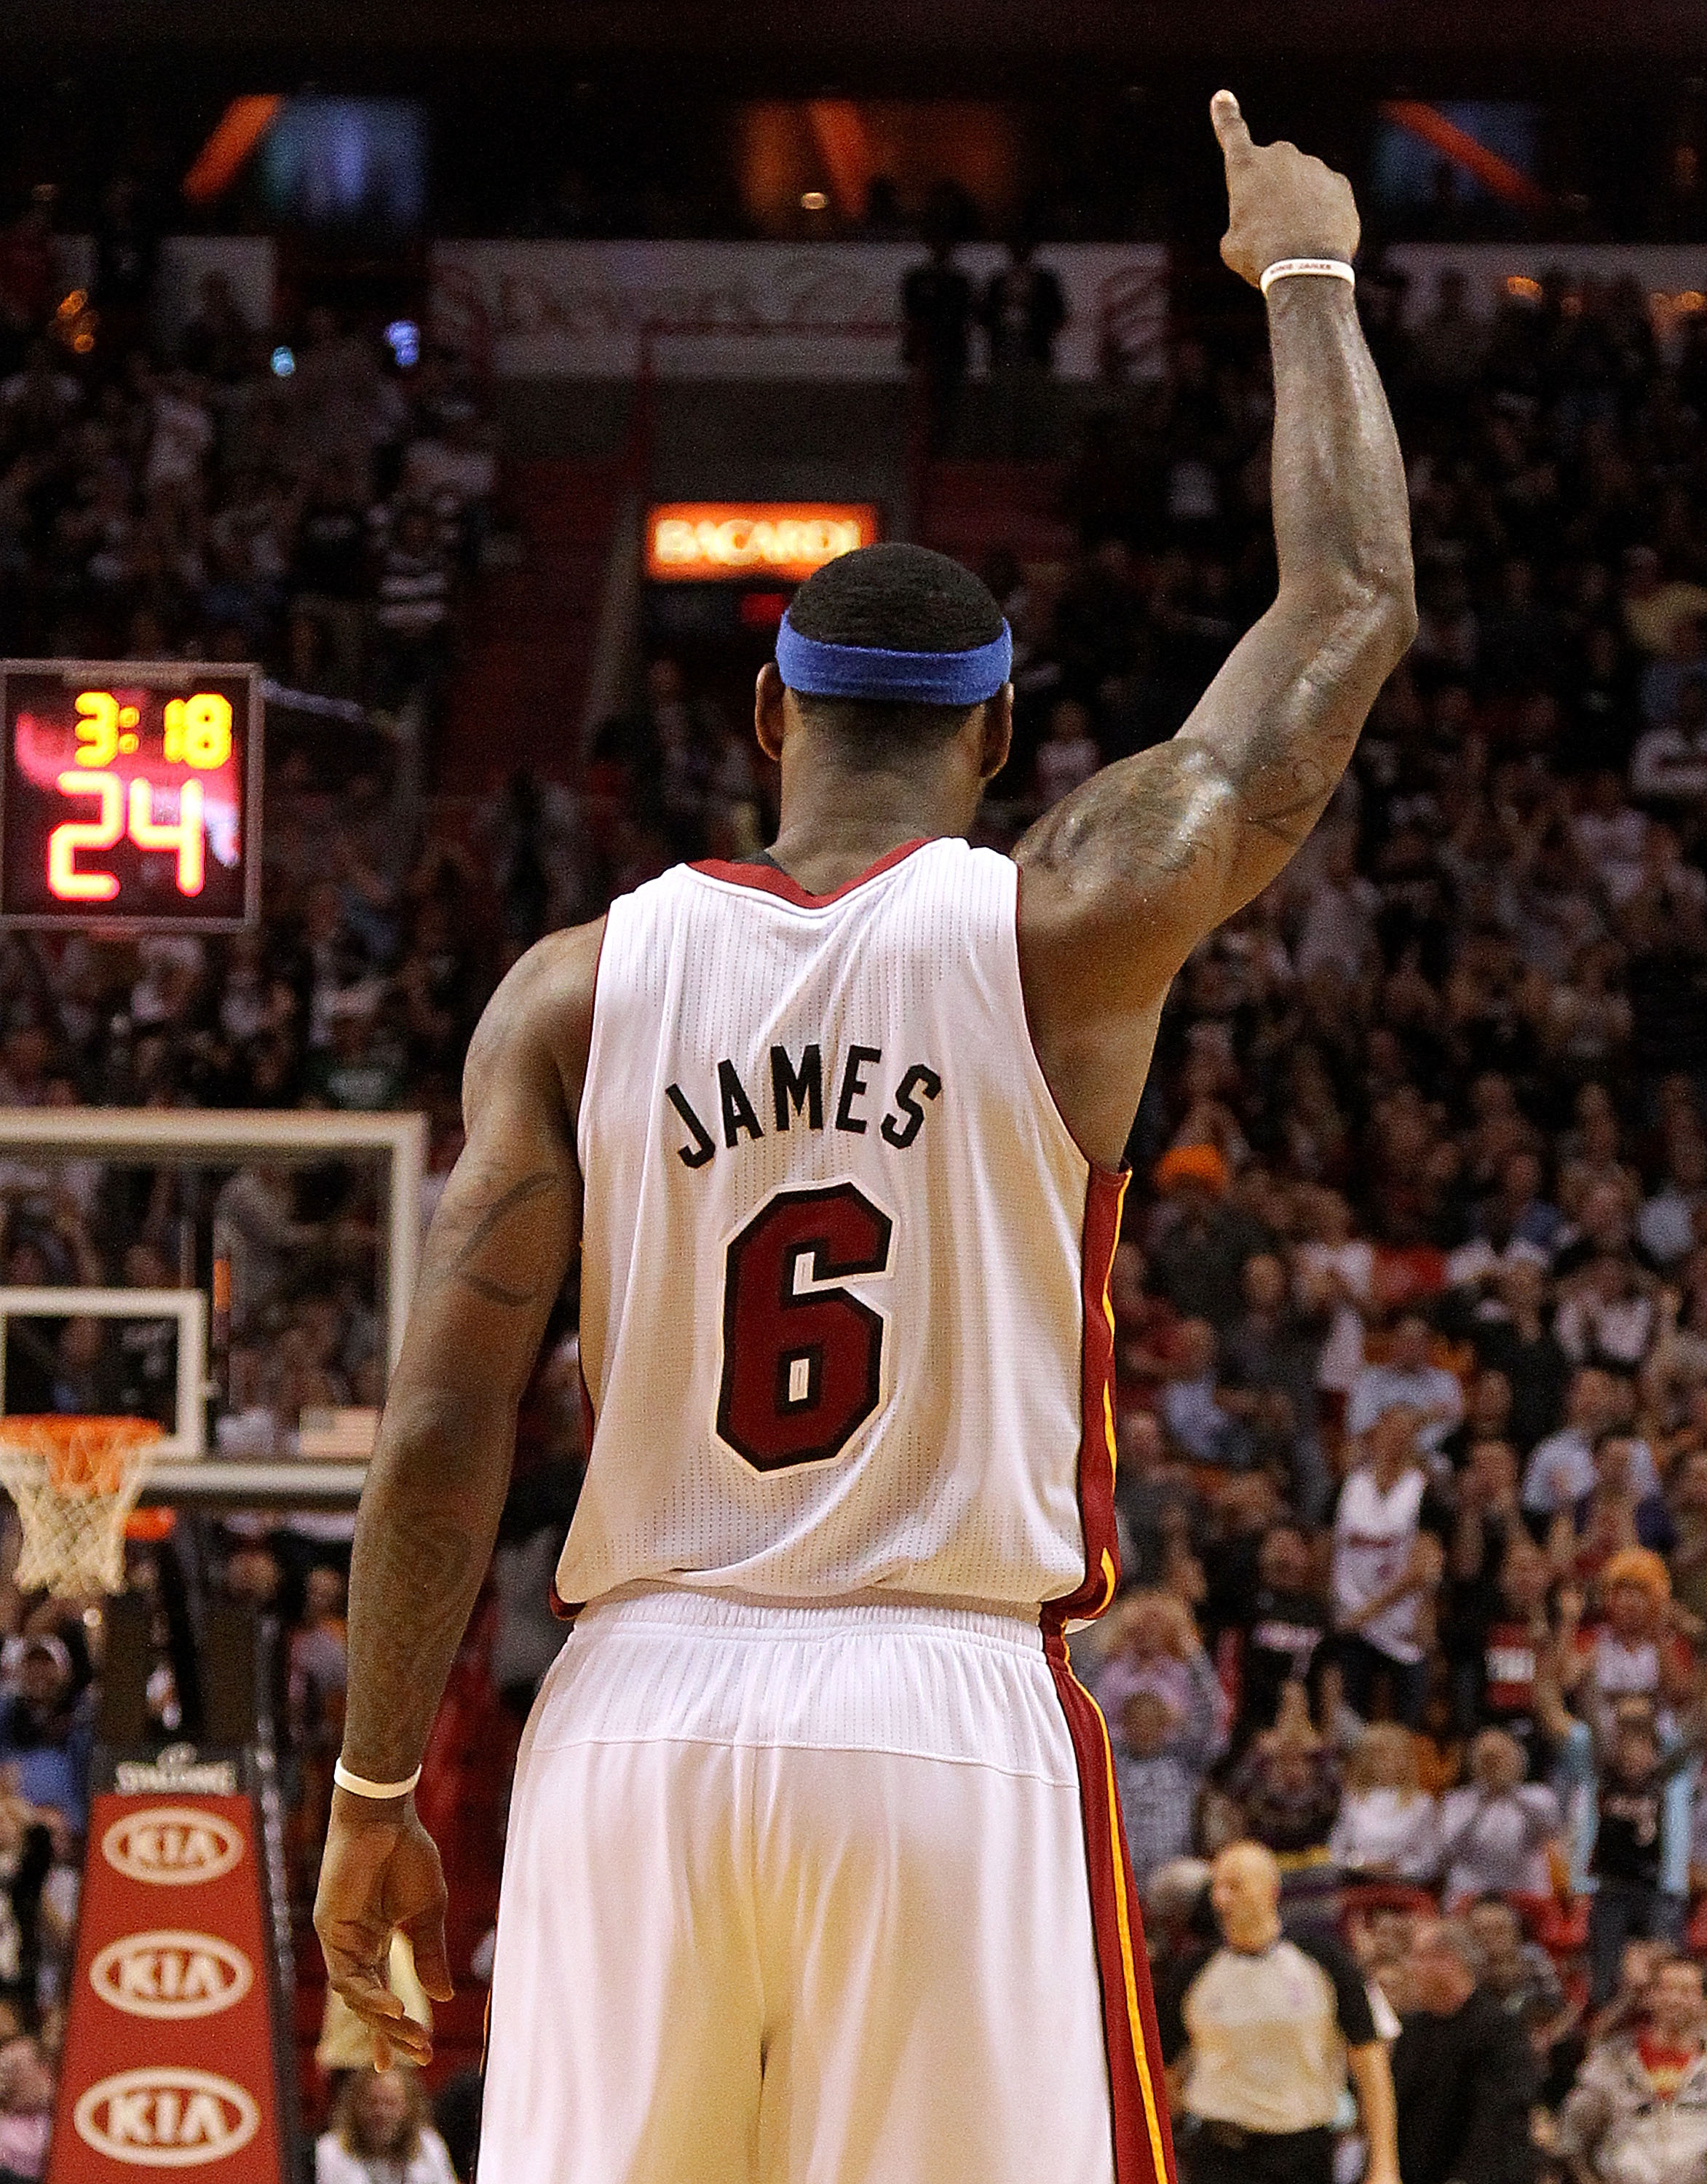 MIAMI, FL - JANUARY 04:  LeBron James #6 of the Miami Heat reacts after a shot during a game against the Milwaukee Bucks at American Airlines Arena on January 4, 2011 in Miami, Florida. NOTE TO USER: User expressly acknowledges and agrees that, by downloa